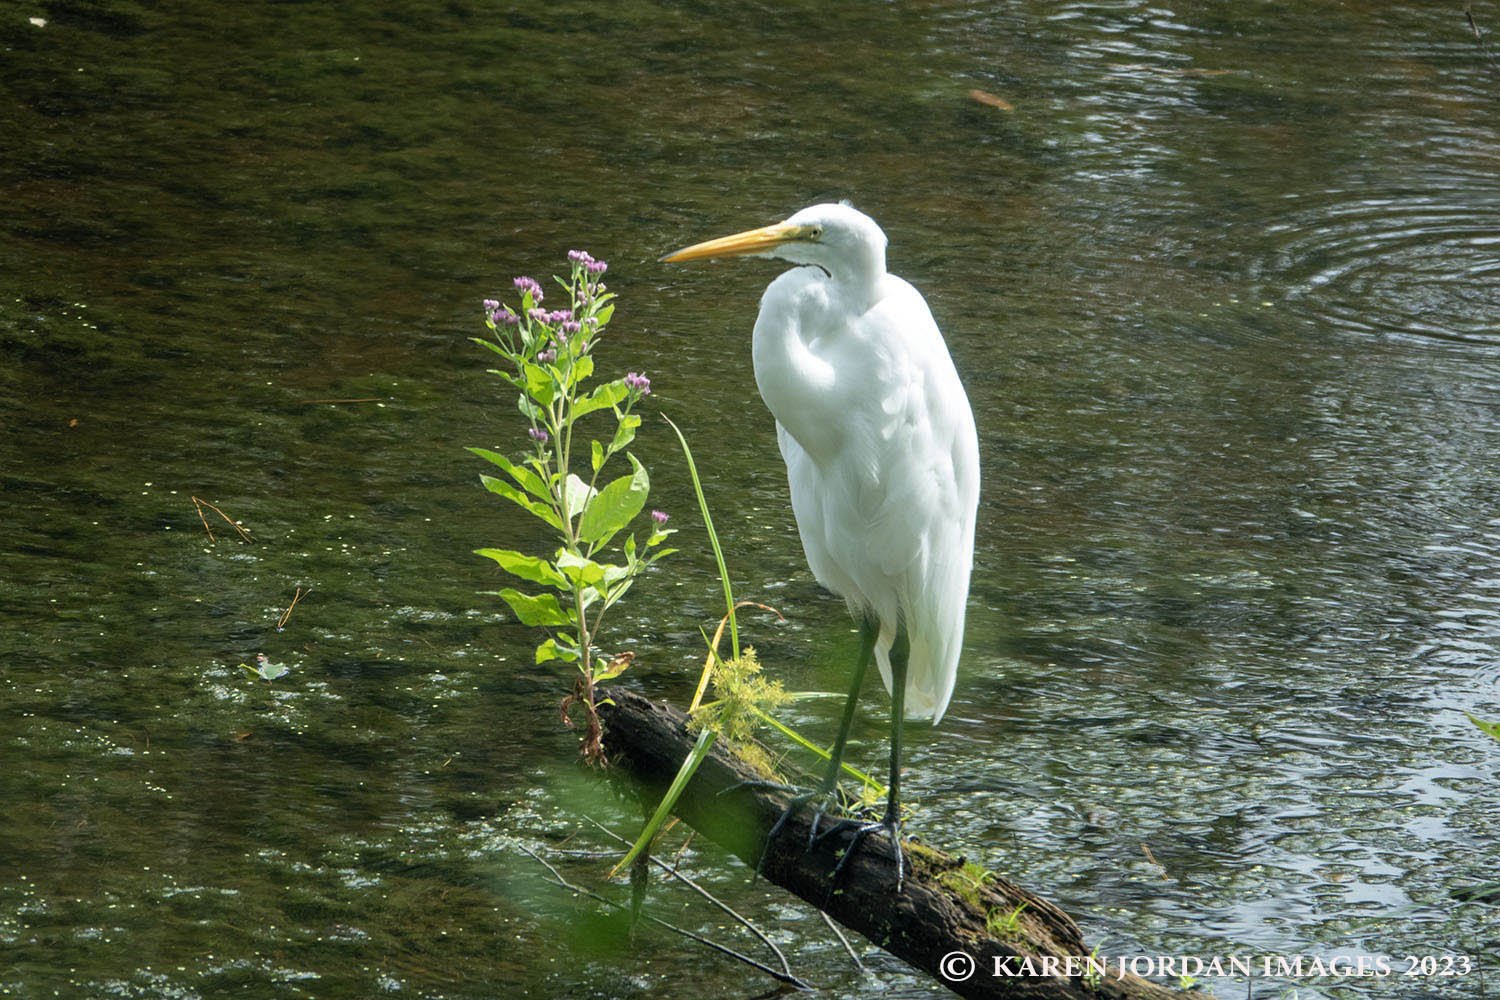 GREAT EGRET: Omen of Good Fortune for the New Year